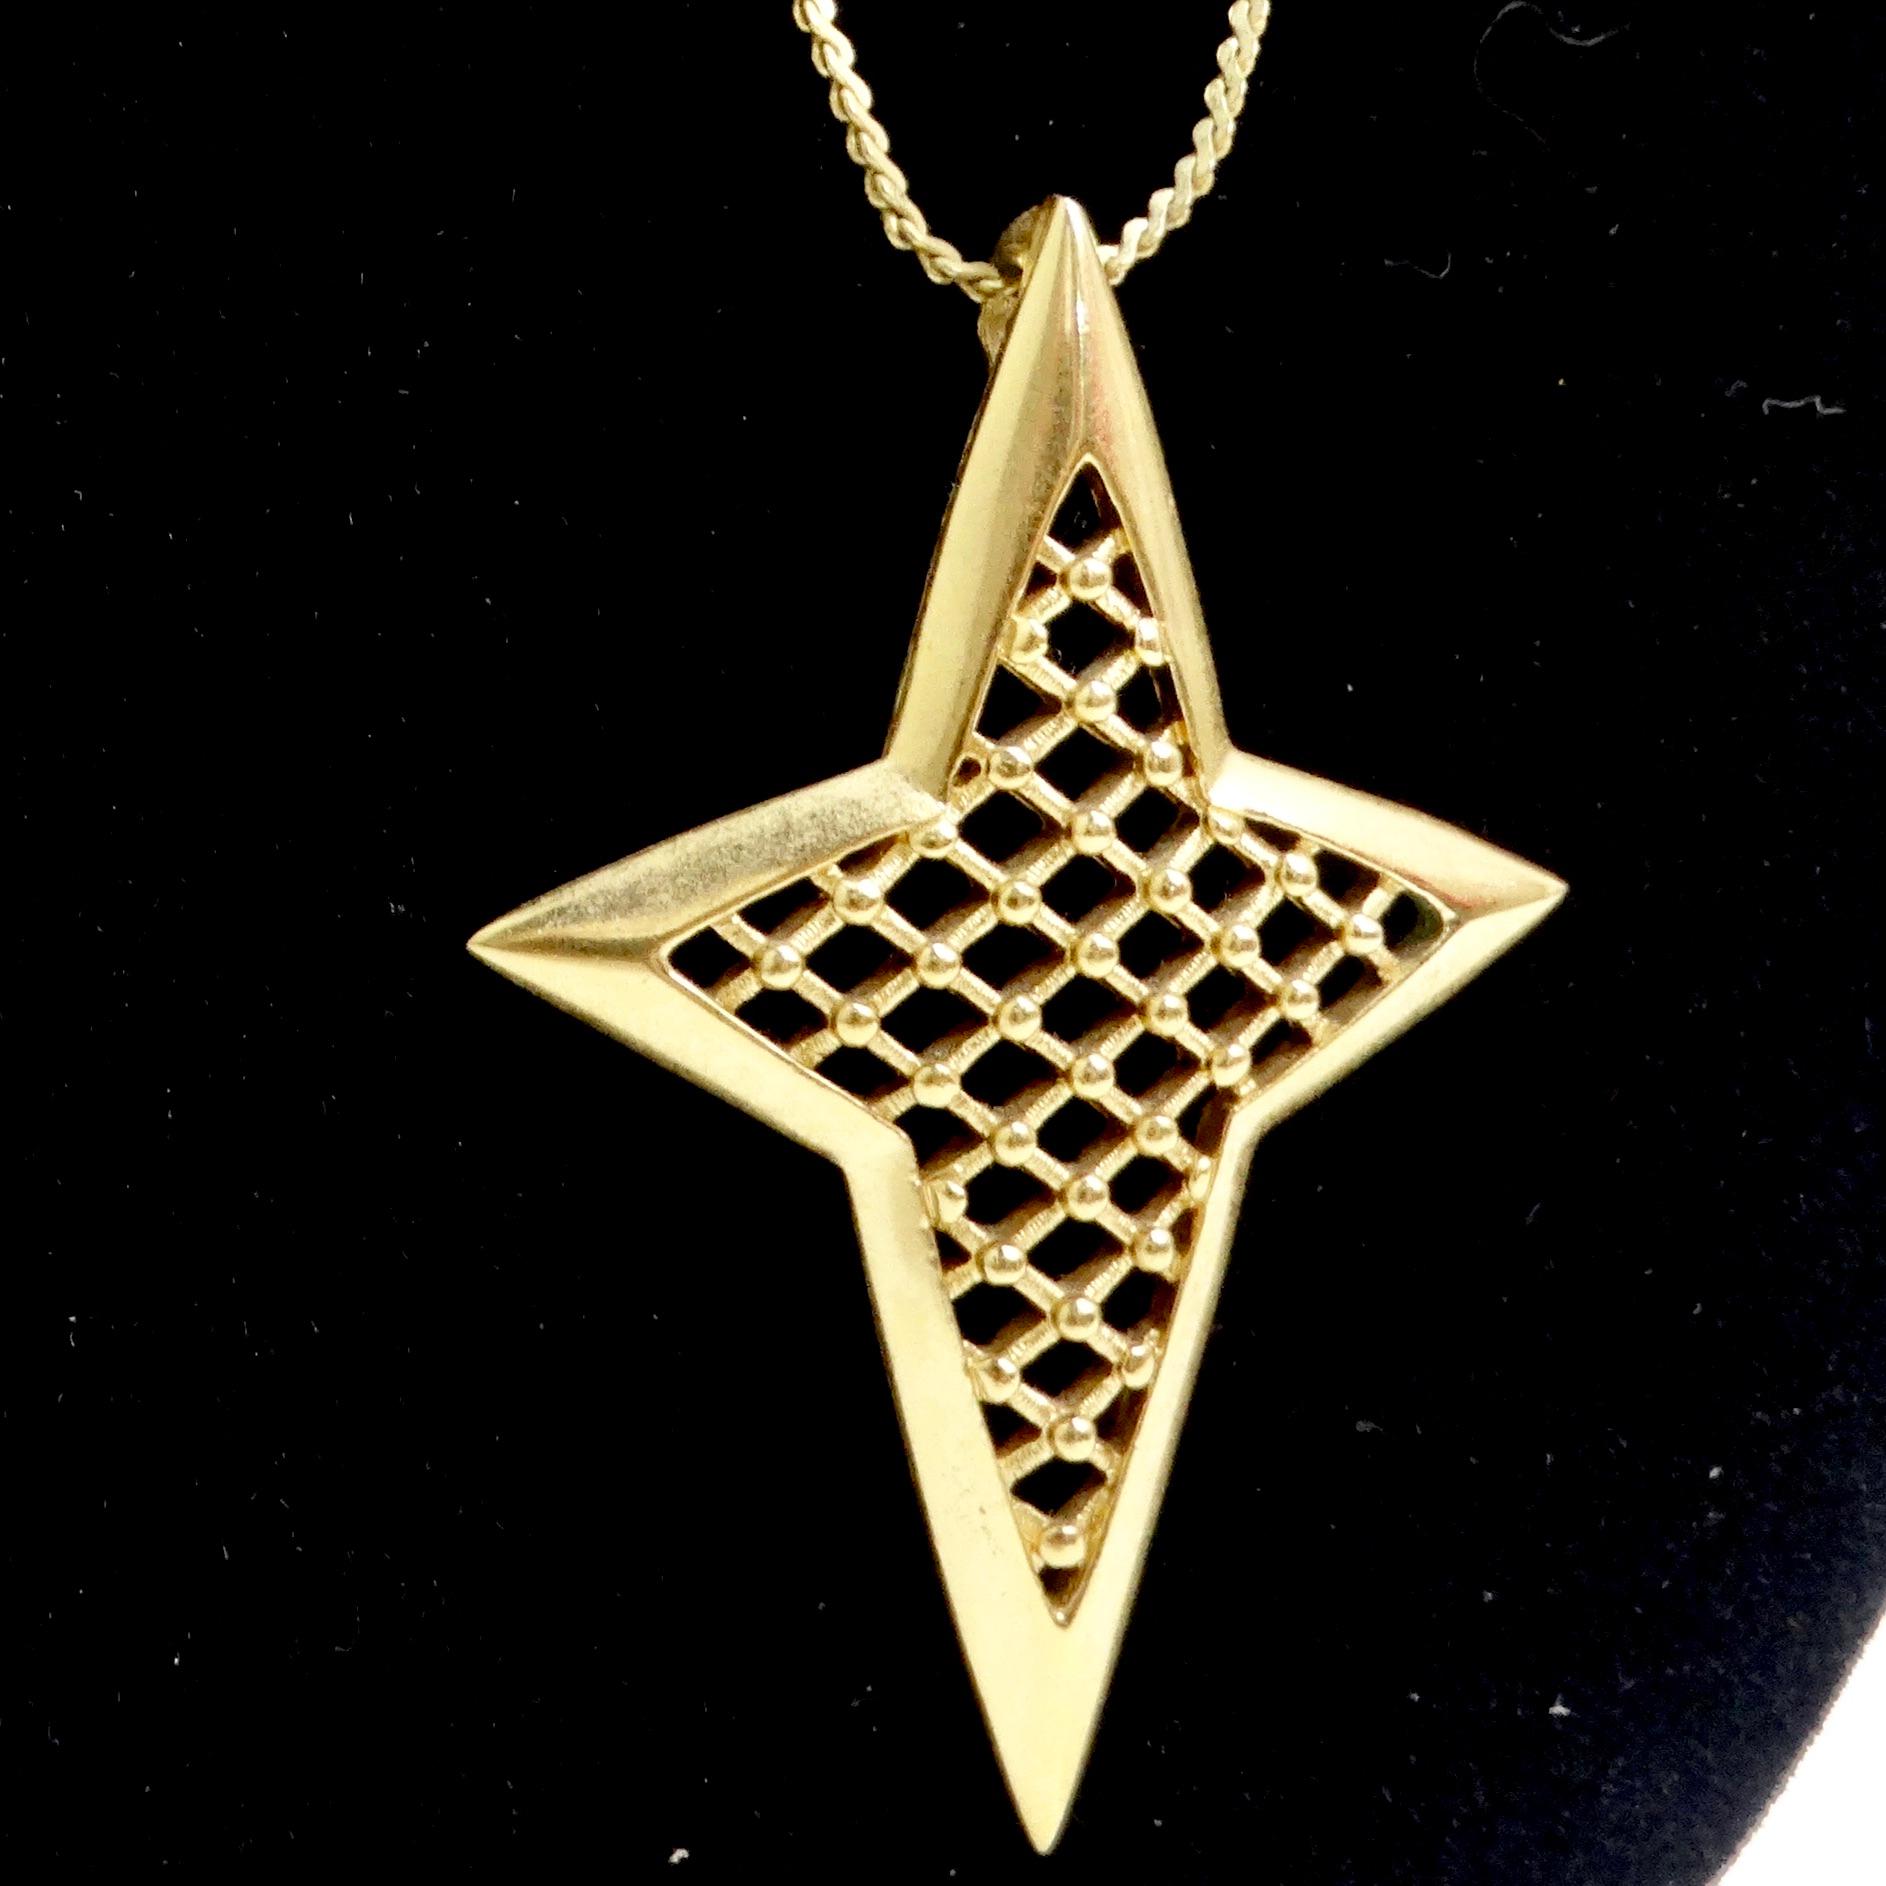 Introducing the Trifari Gold Tone Star Pendant Necklace – a classic piece that adds a touch of celestial elegance to your style! This exquisite gold tone necklace features a large star-shaped pendant with a captivating crisscross design, reminiscent